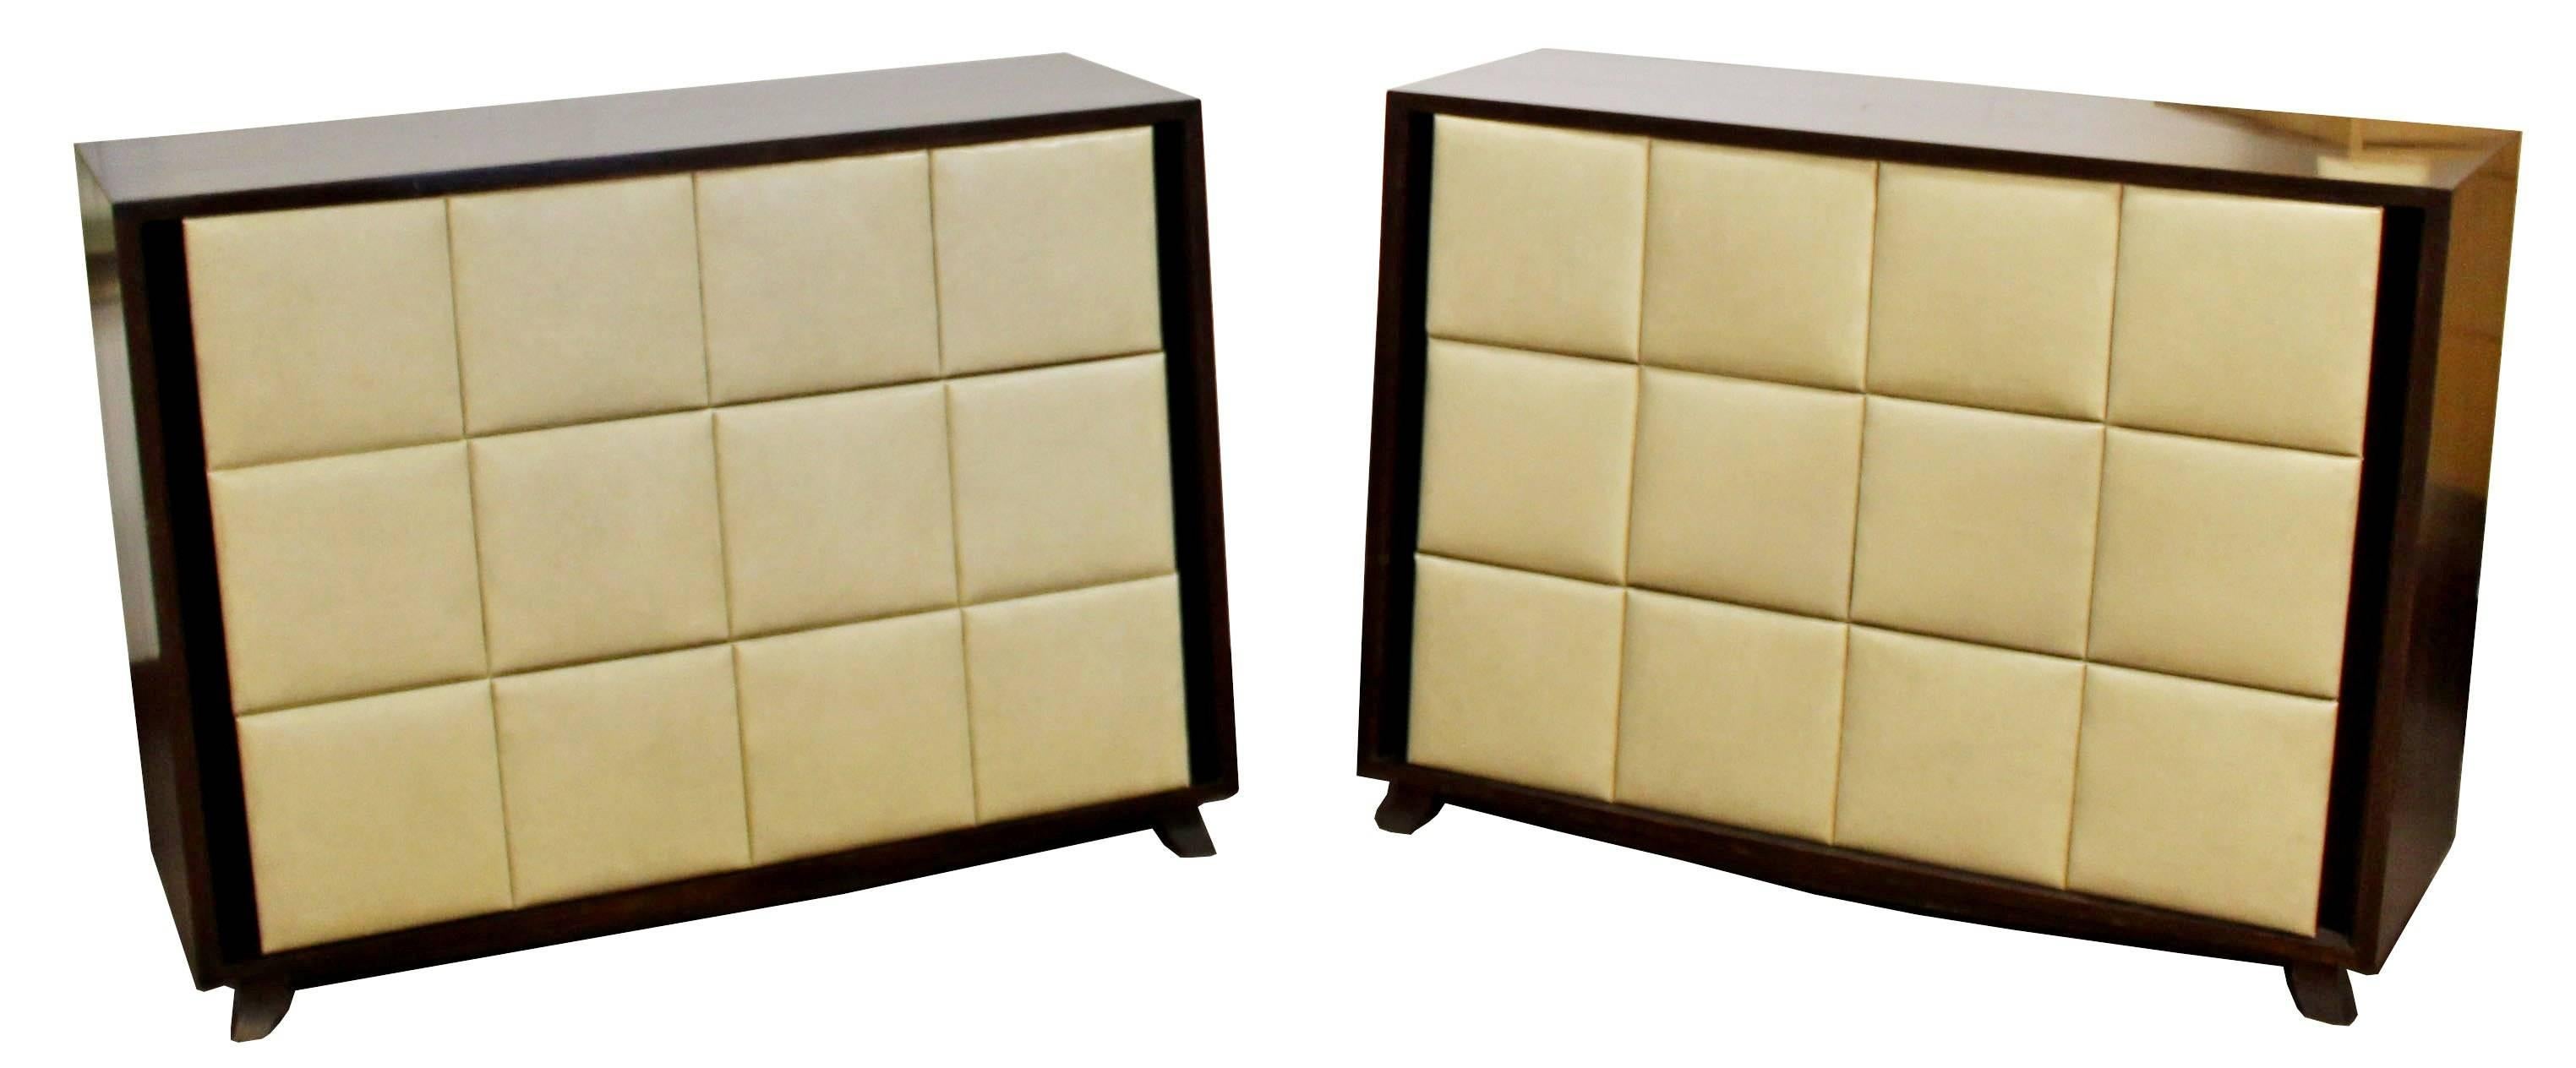 For your consideration is a magnificent pair of mahogany dressers, with three padded, cream leather drawers, by Gilbert Rohde for Herman Miller, circa 1930s. In excellent condition. The dimensions are 44.5